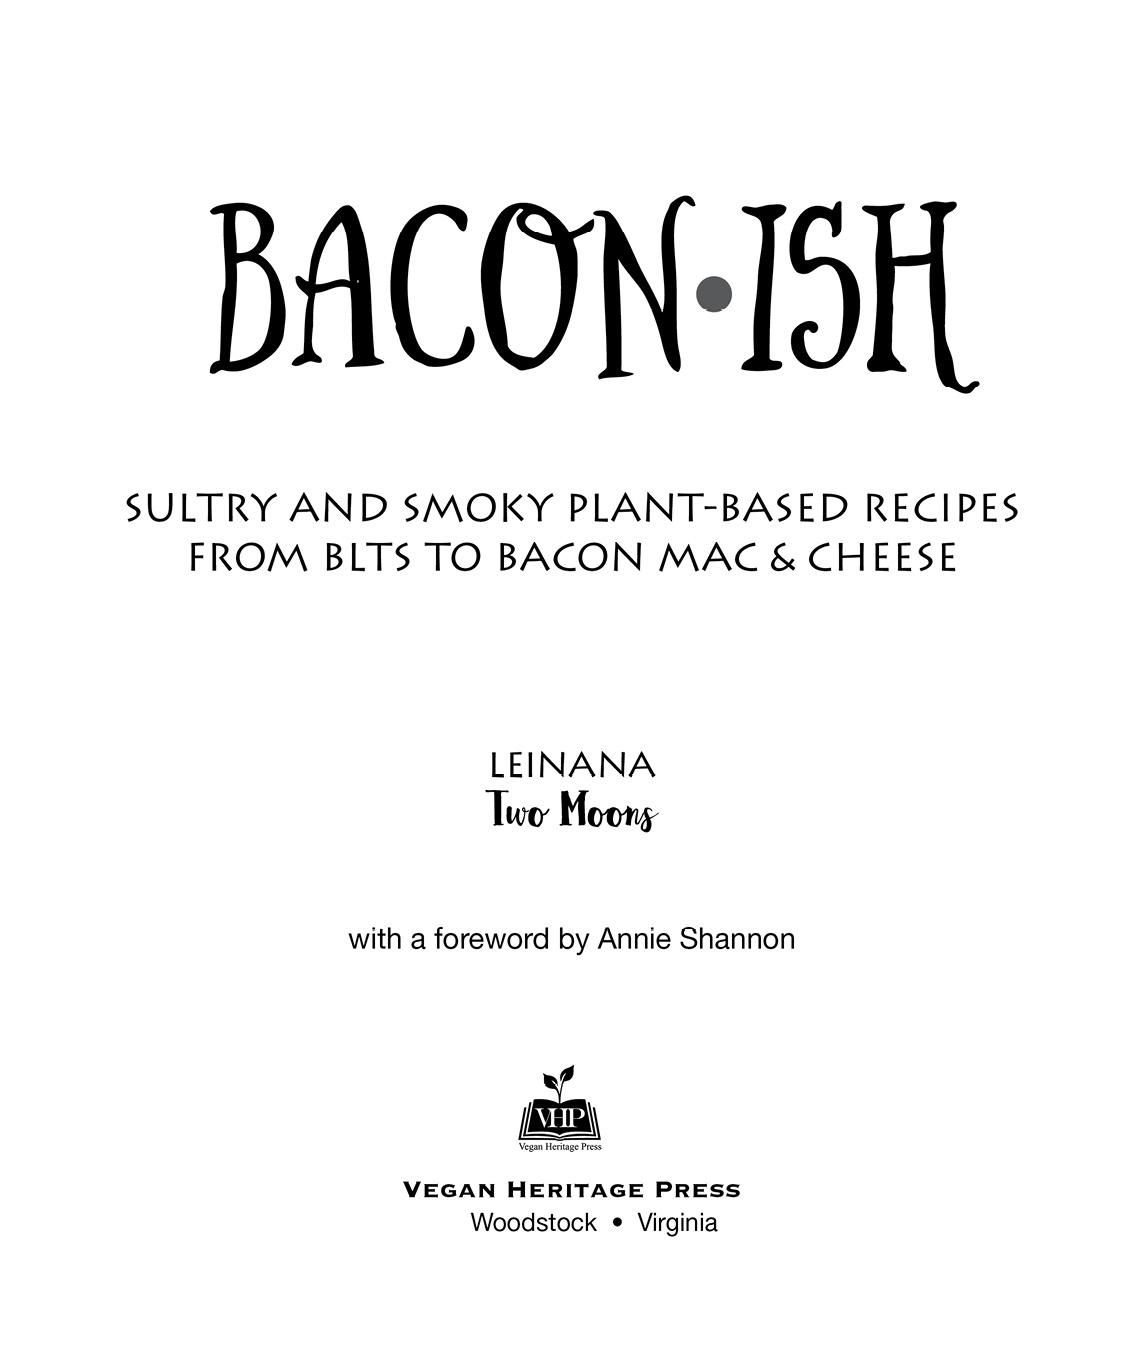 Baconish Sultry and Smoky Plant-Based Recipes from BLTs to Mac Cheese - photo 2